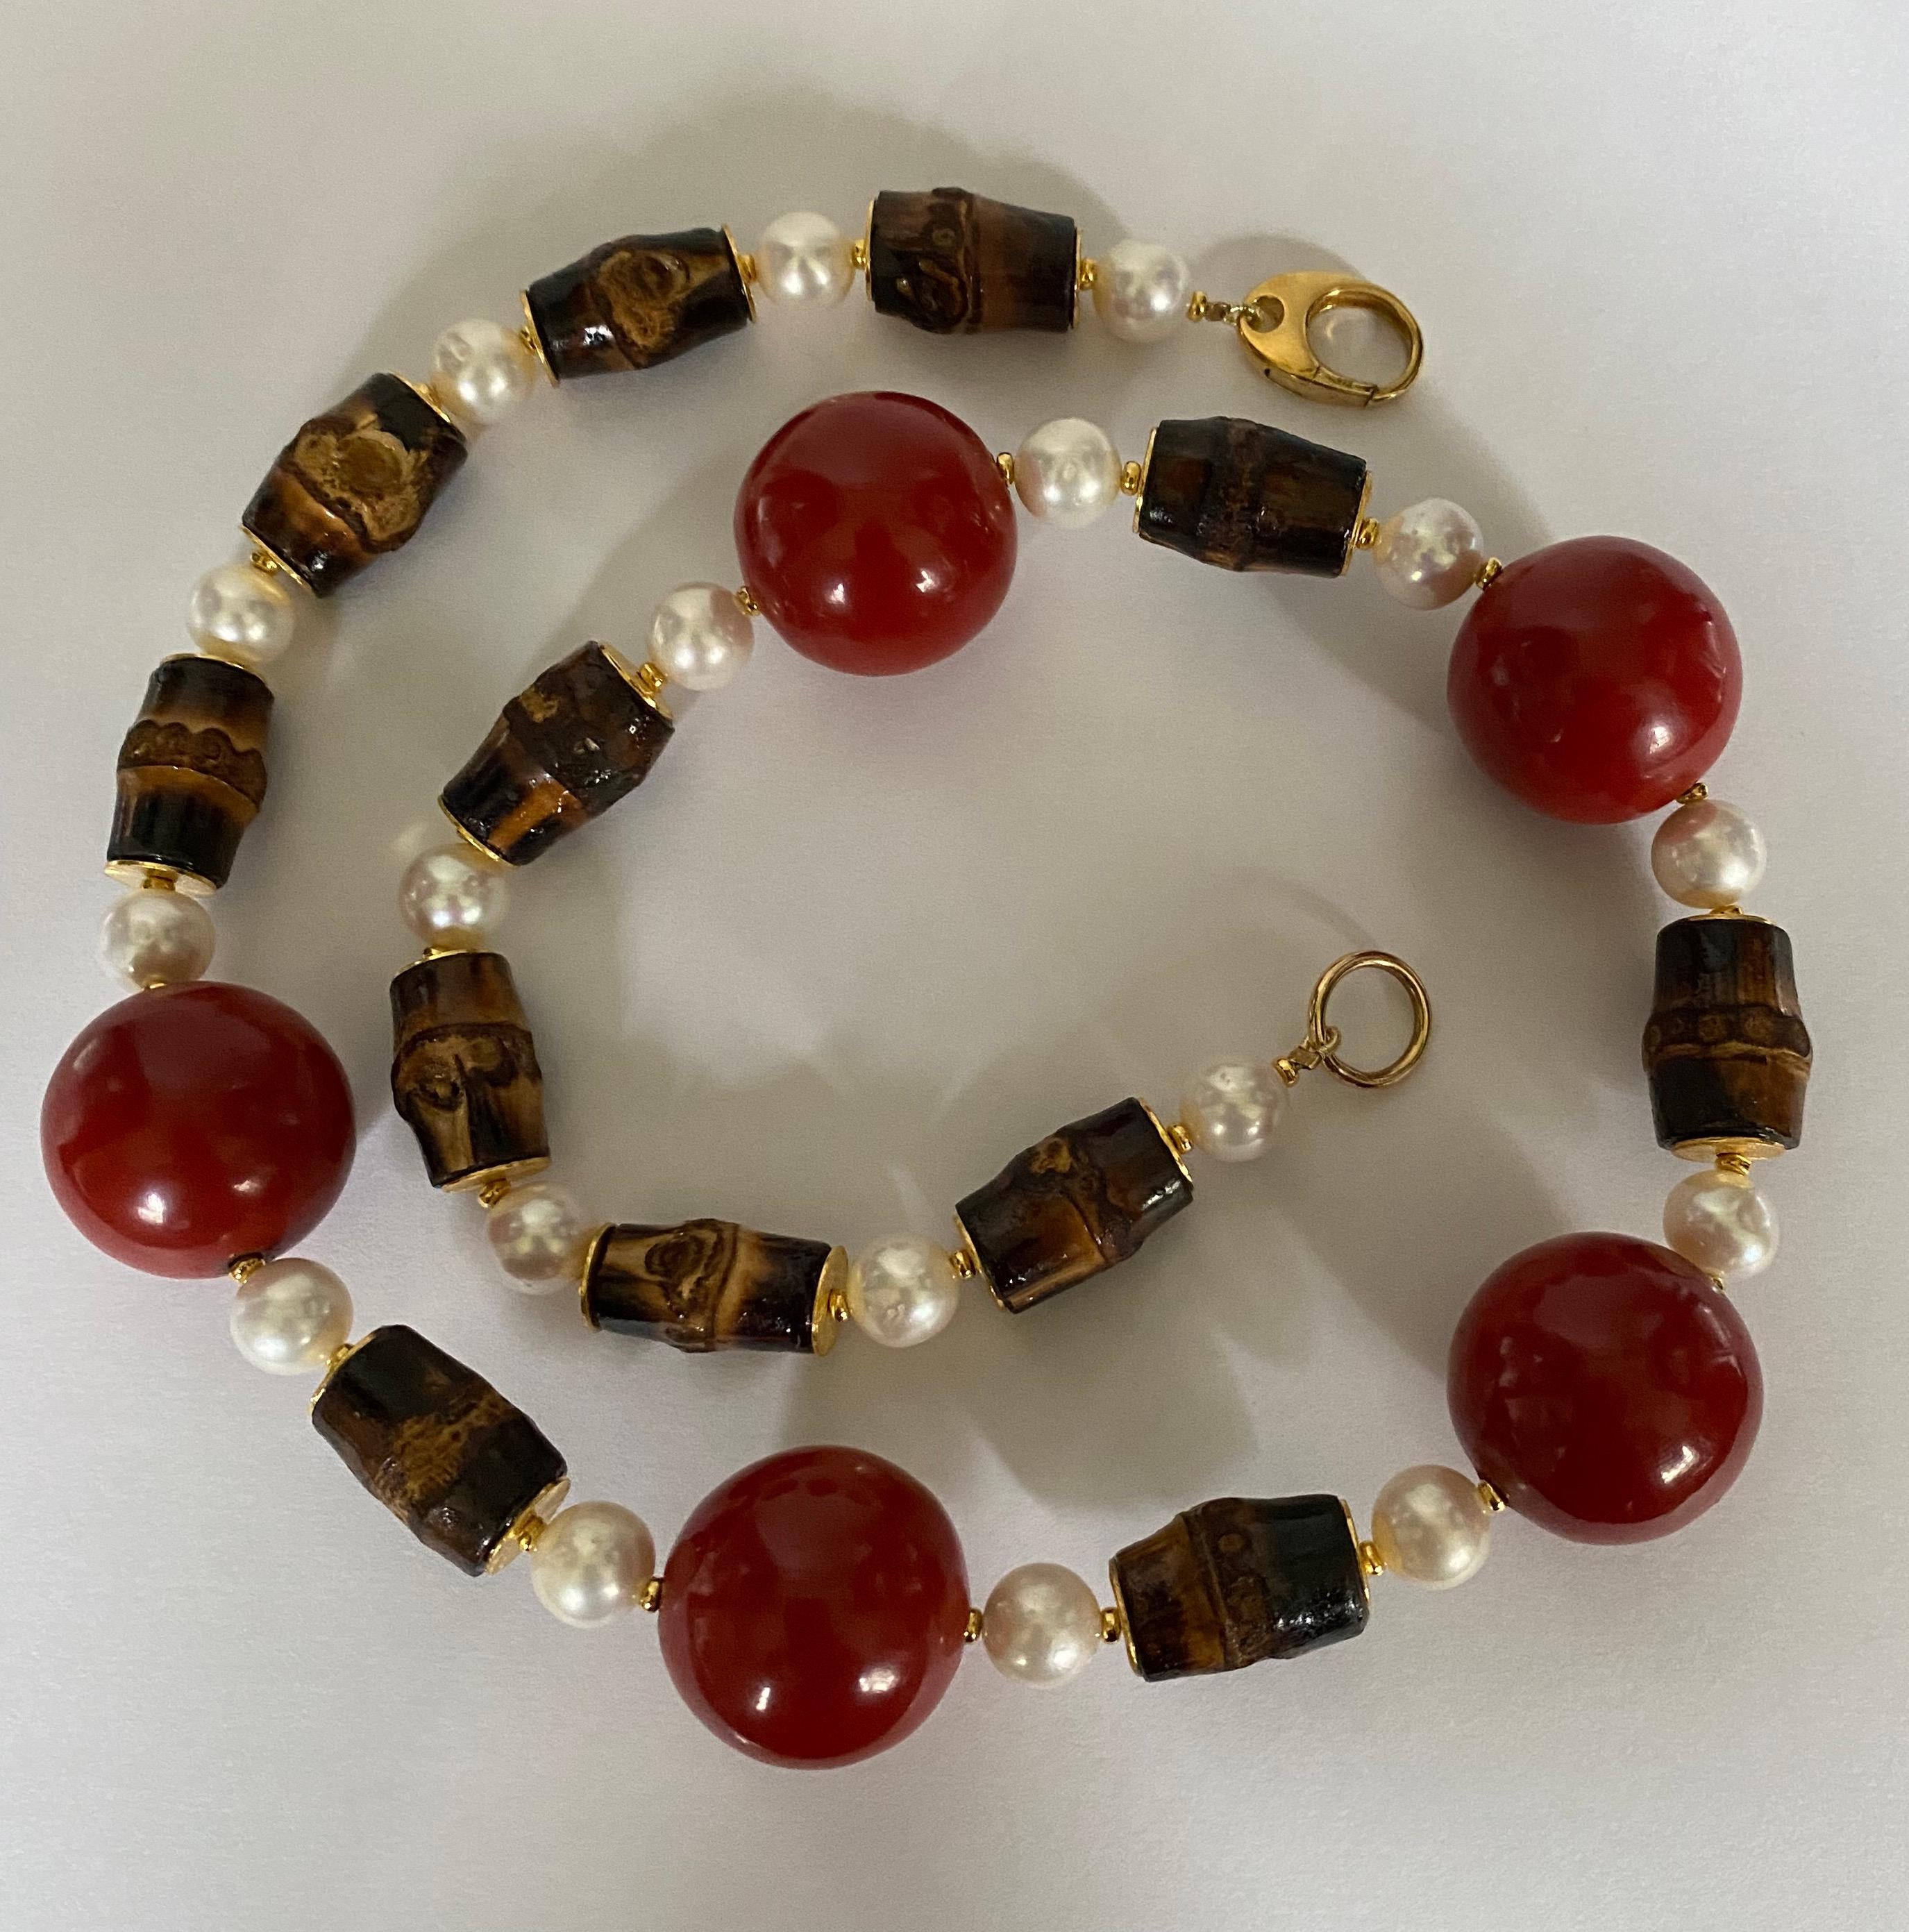 Cinnabar lacquered wood beads are showcased in this bold  necklace.  Cinnabar is a mineral ground to a fine powder and mixed with resin (sap) from pines trees found in southern China.  The process is tedious as the material takes days to cure and